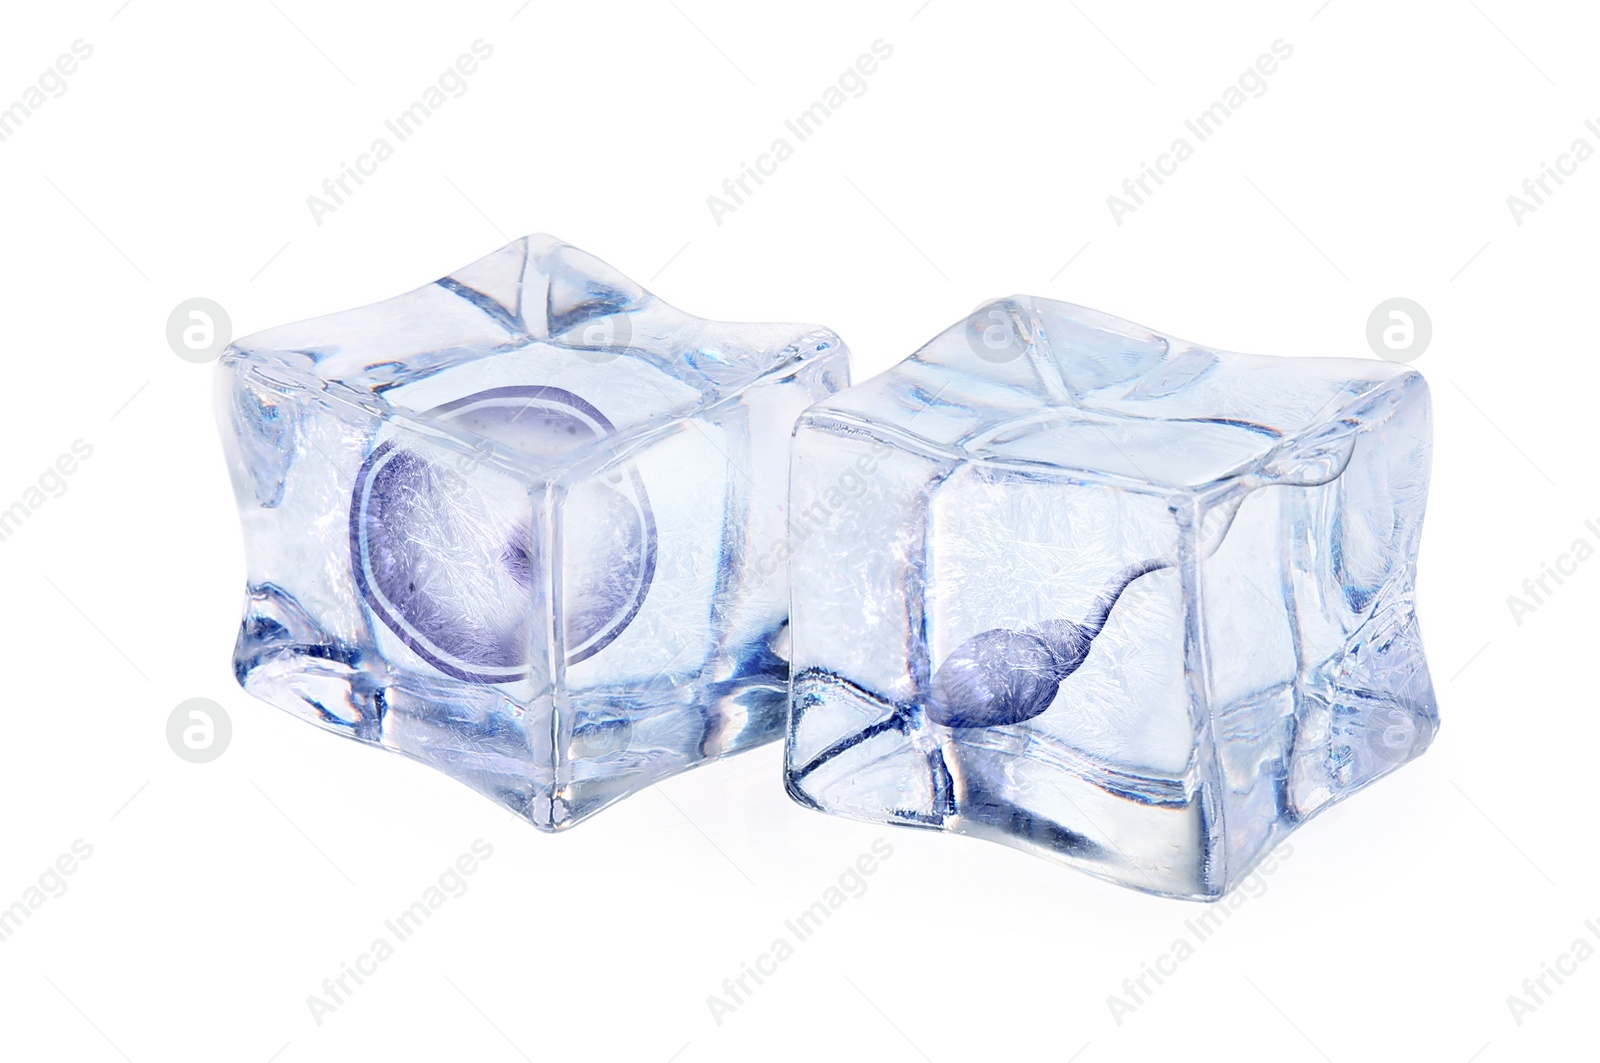 Image of Cryopreservation of genetic material. Ovum and sperm cells in ice cubes on white background